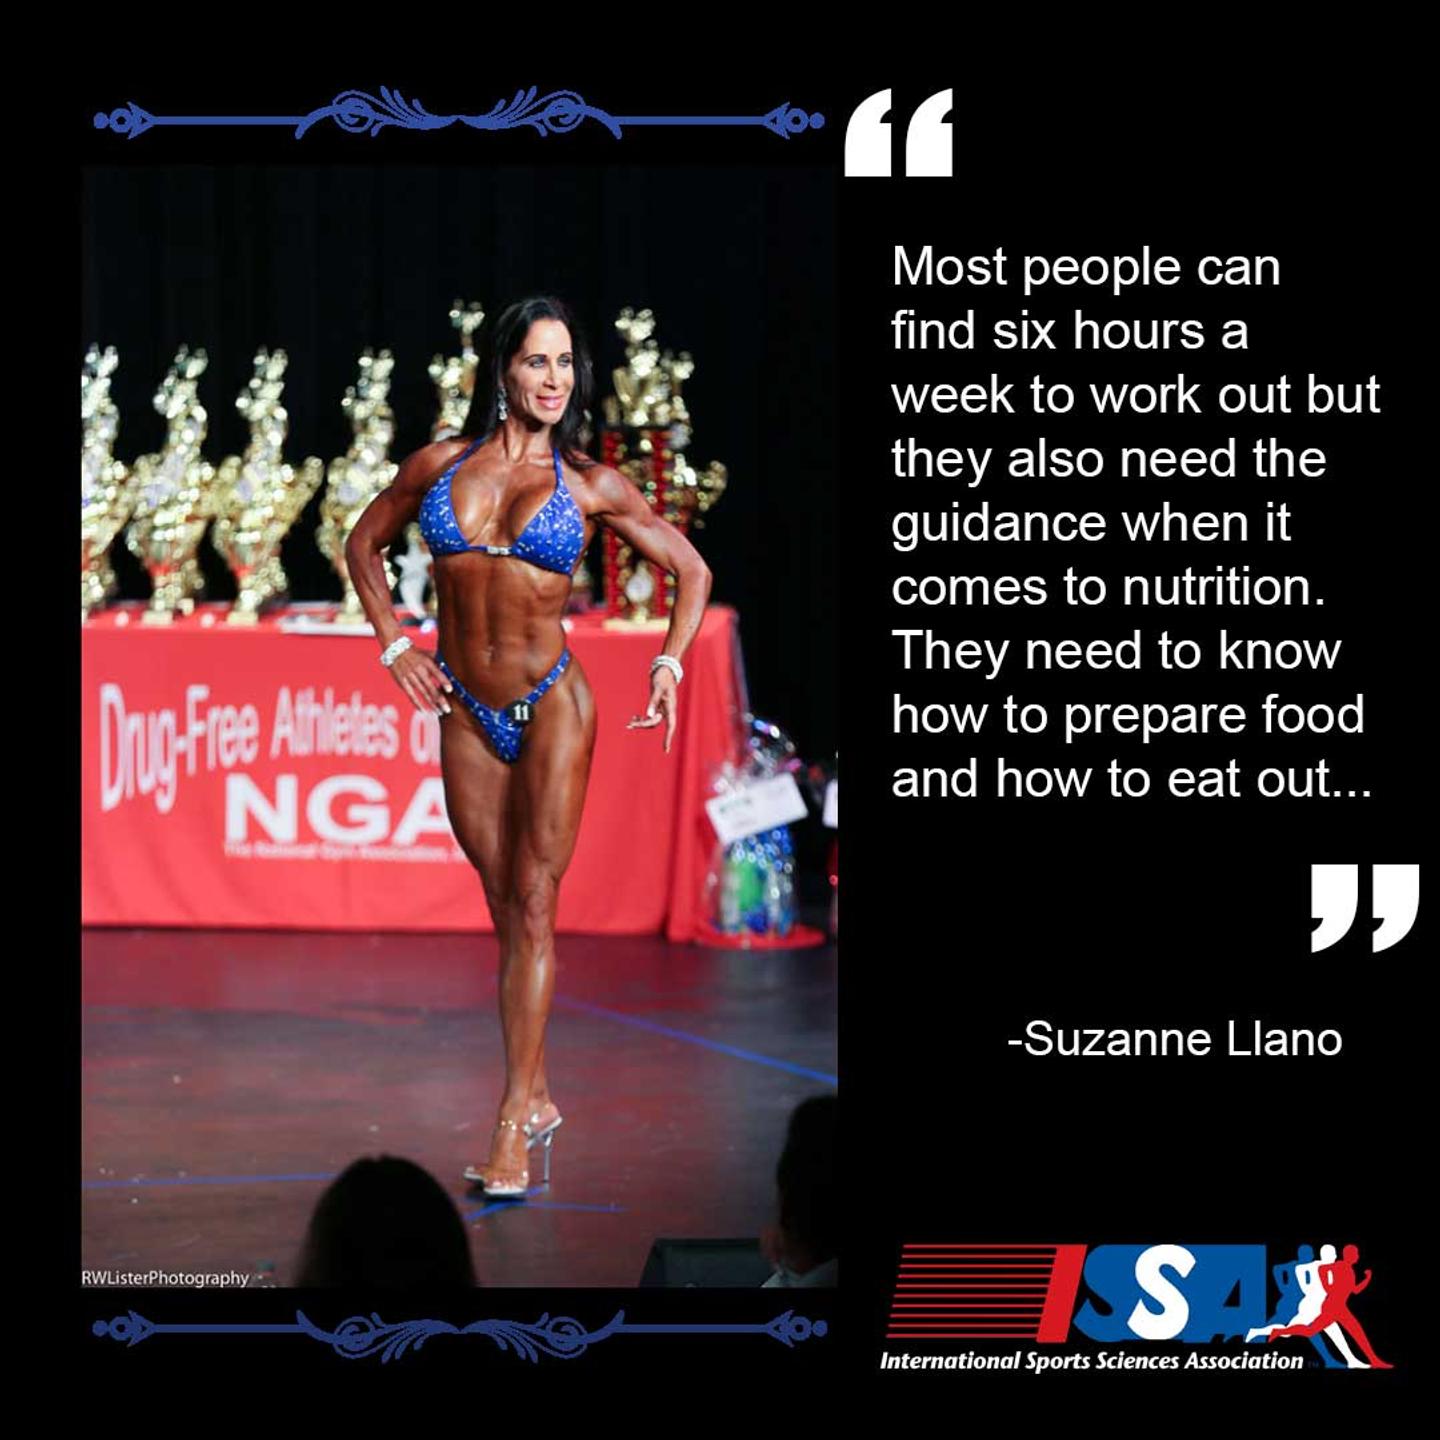 ISSA, International Sports Sciences Association, Certified Personal Trainer, ISSAonline, Suzanne Llano: Becoming a Personal Trainer